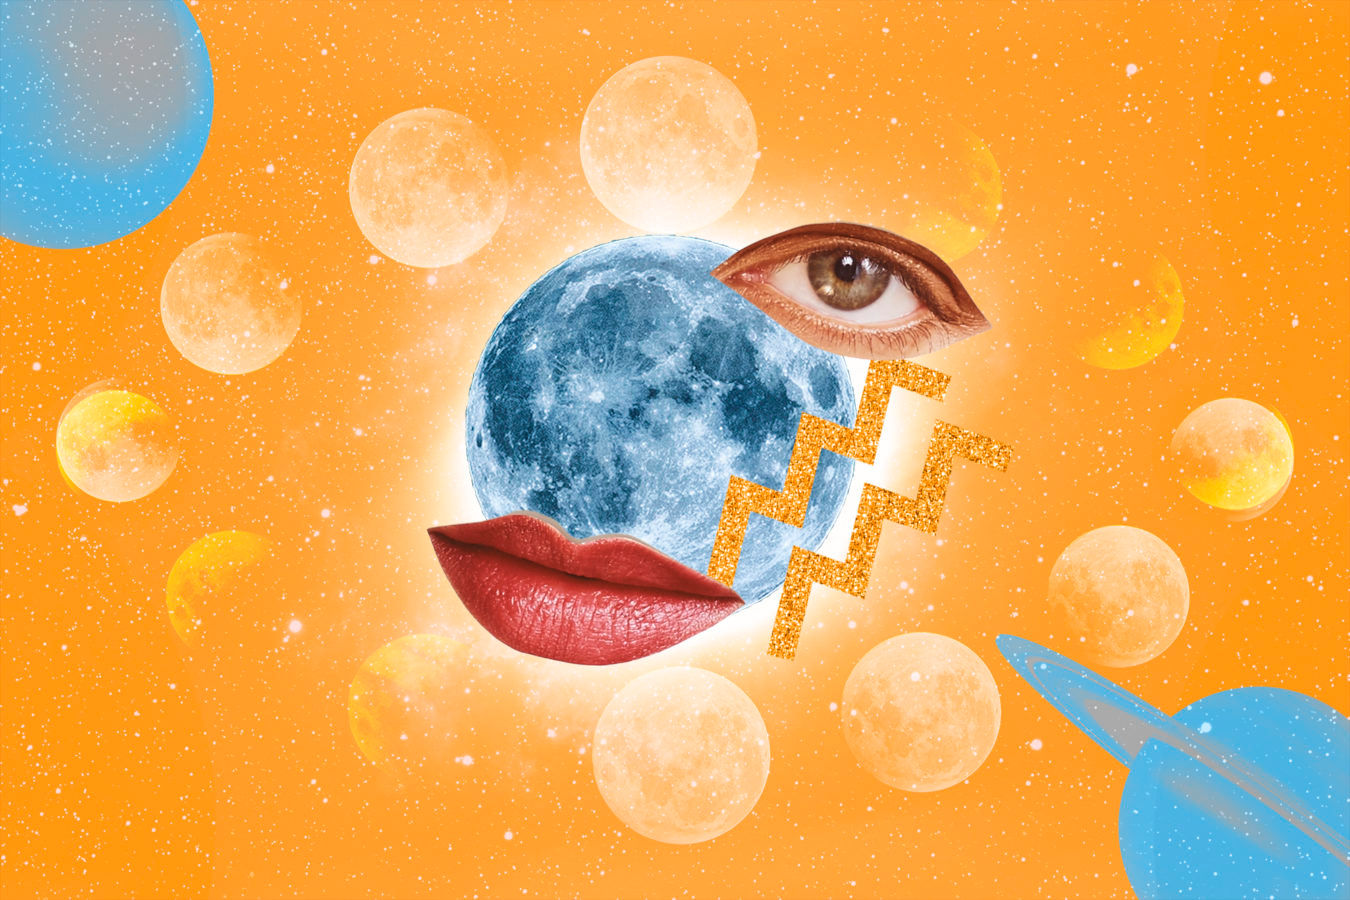 February 2022’s New Moon in Aquarius is prime for intention setting